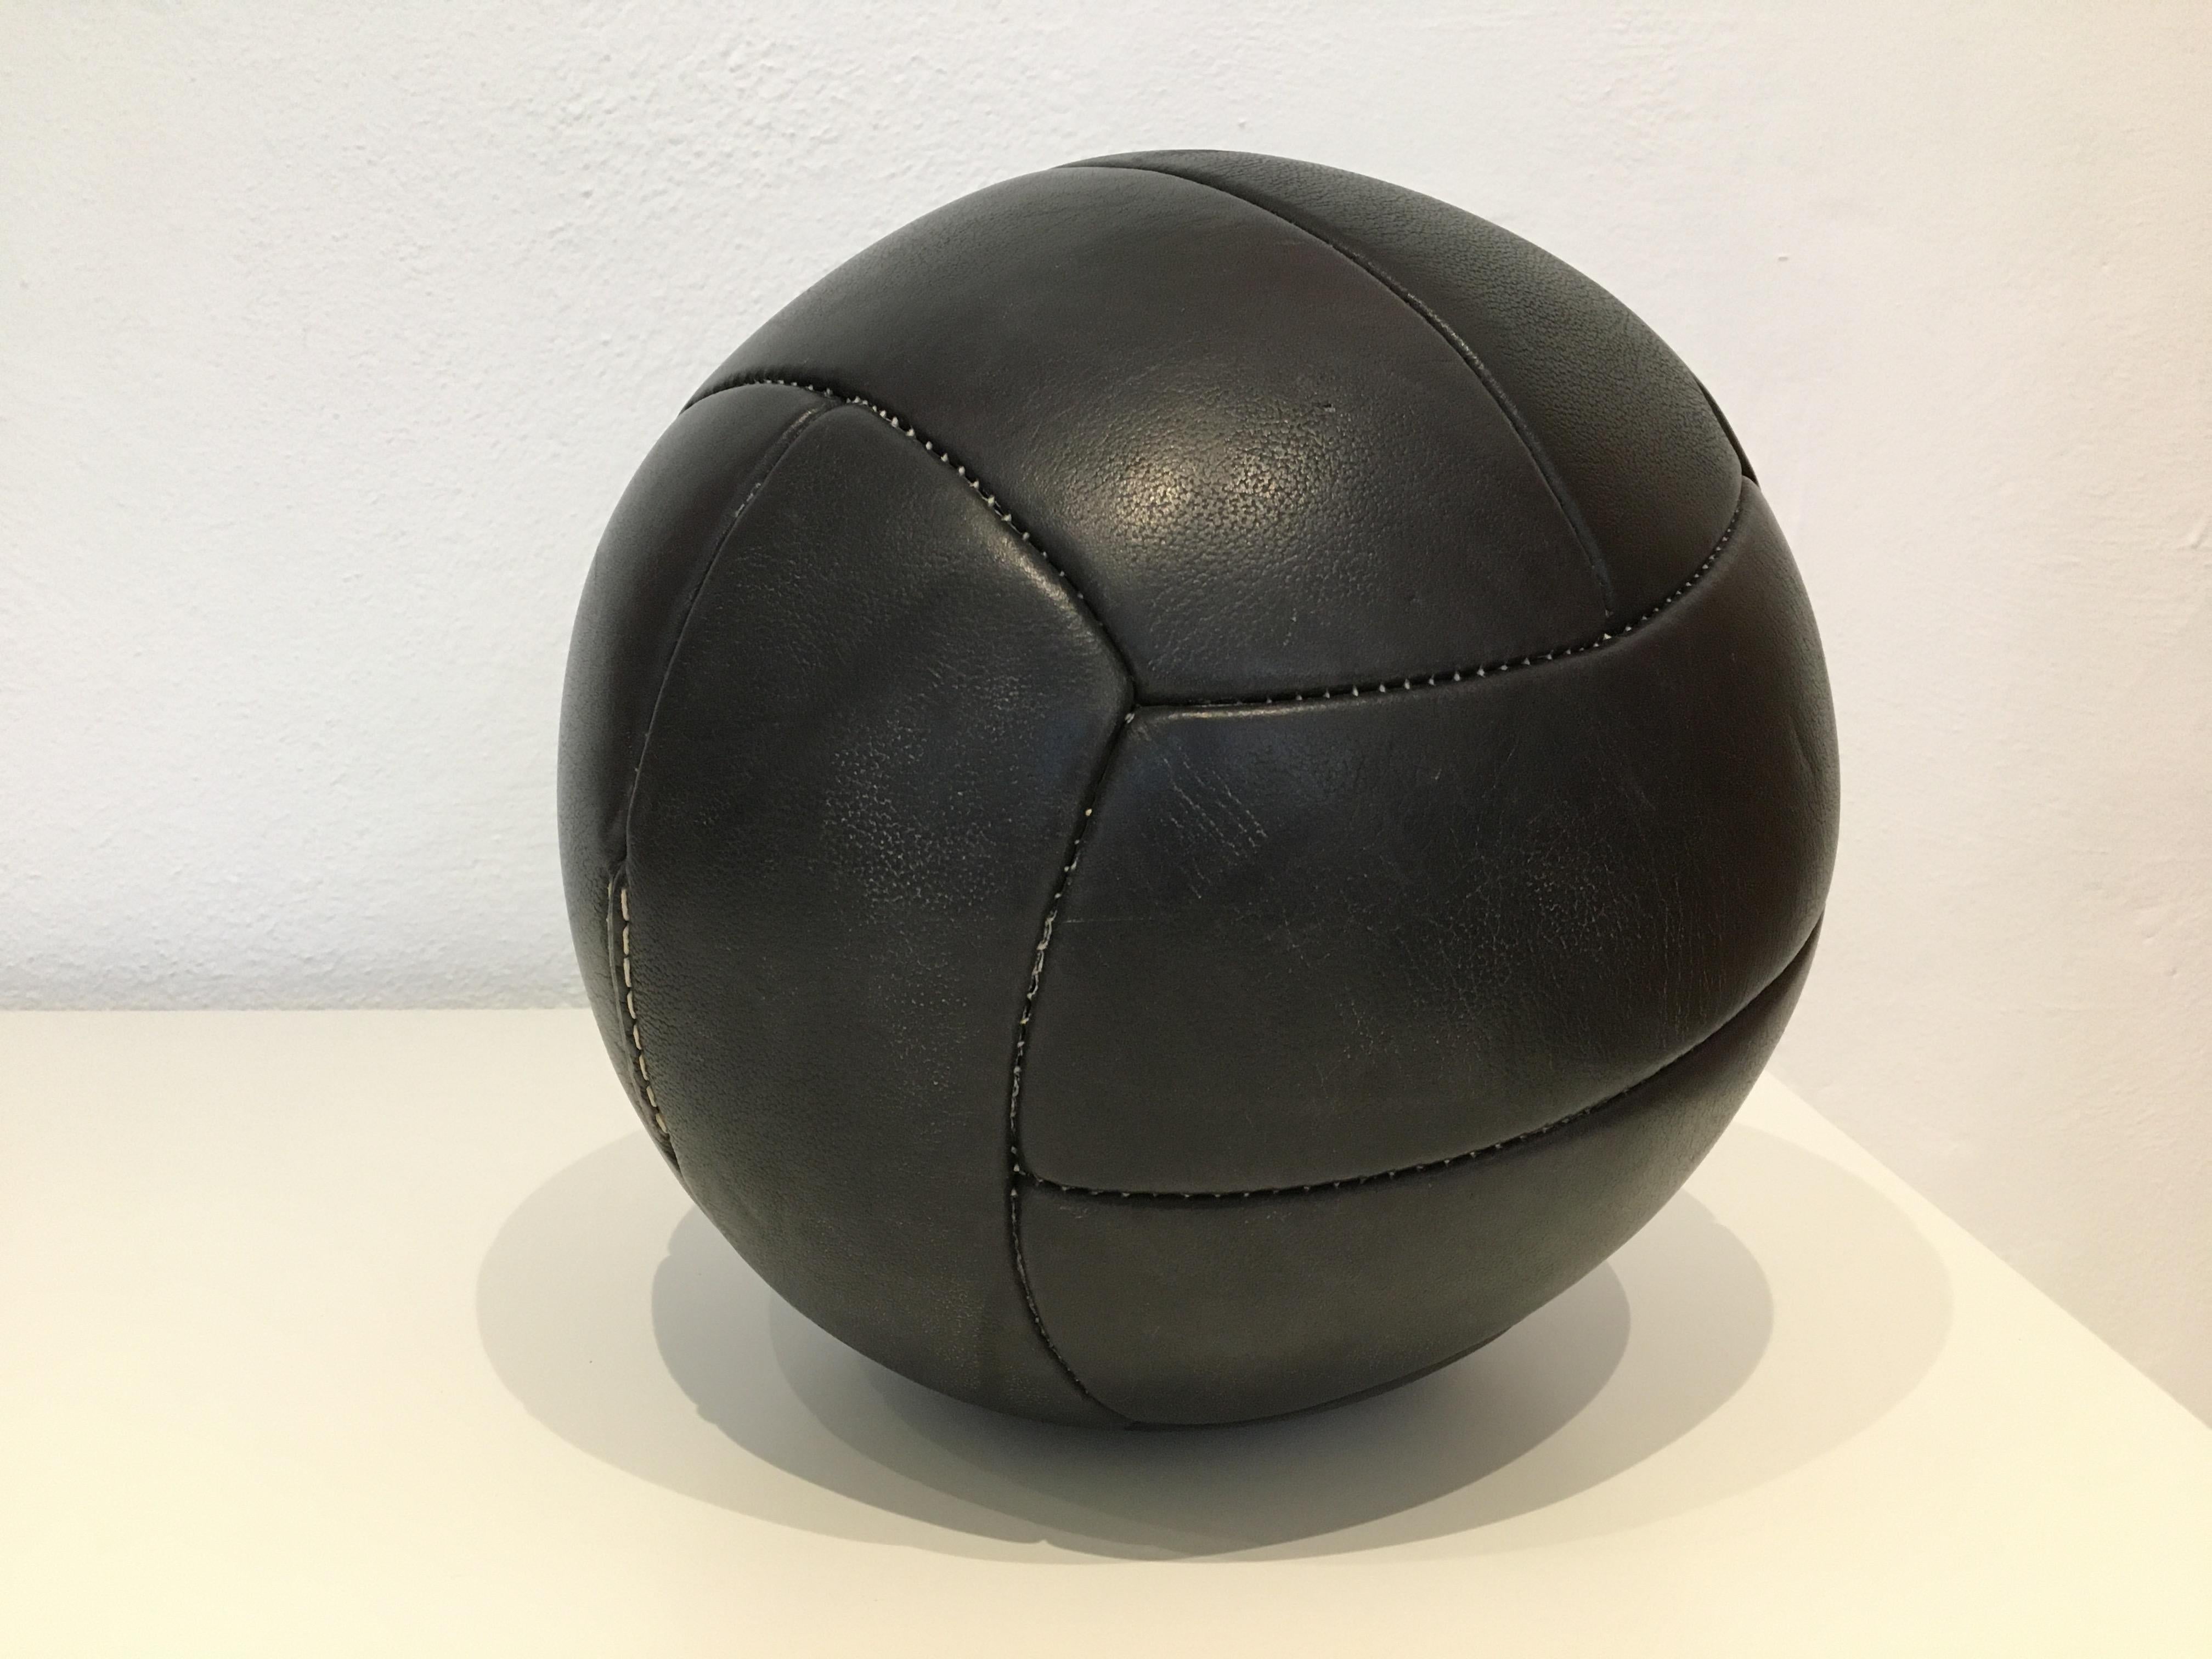 Vintage Black Leather Medicine Ball, 3kg, 1930s In Good Condition For Sale In Wien, AT